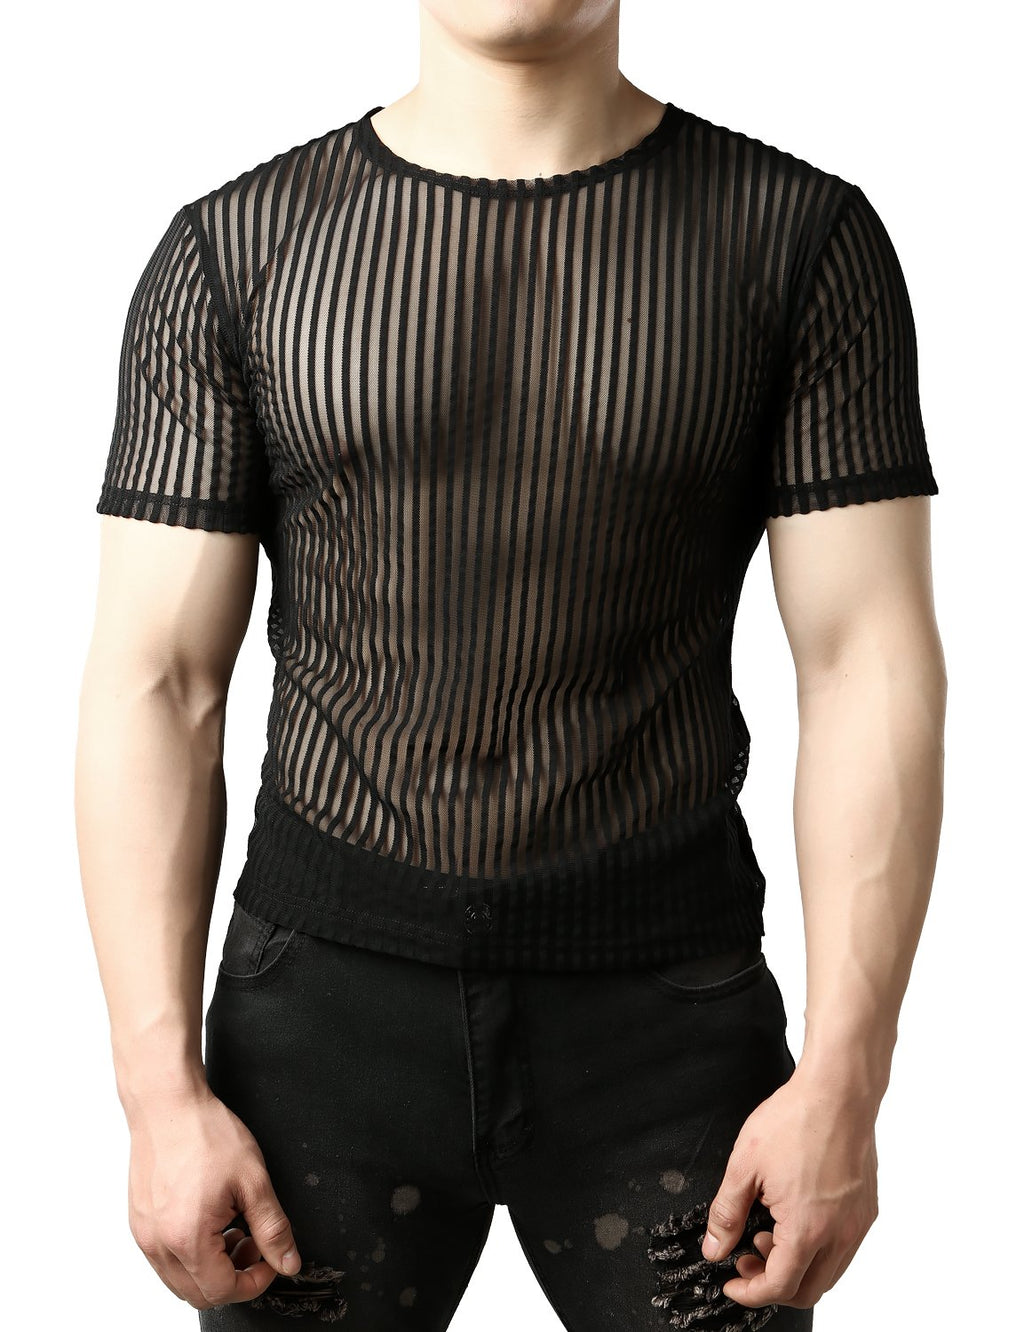 JOGAL Men's Vertical Striped See Through Fitted Short Sleeve Muscle Top